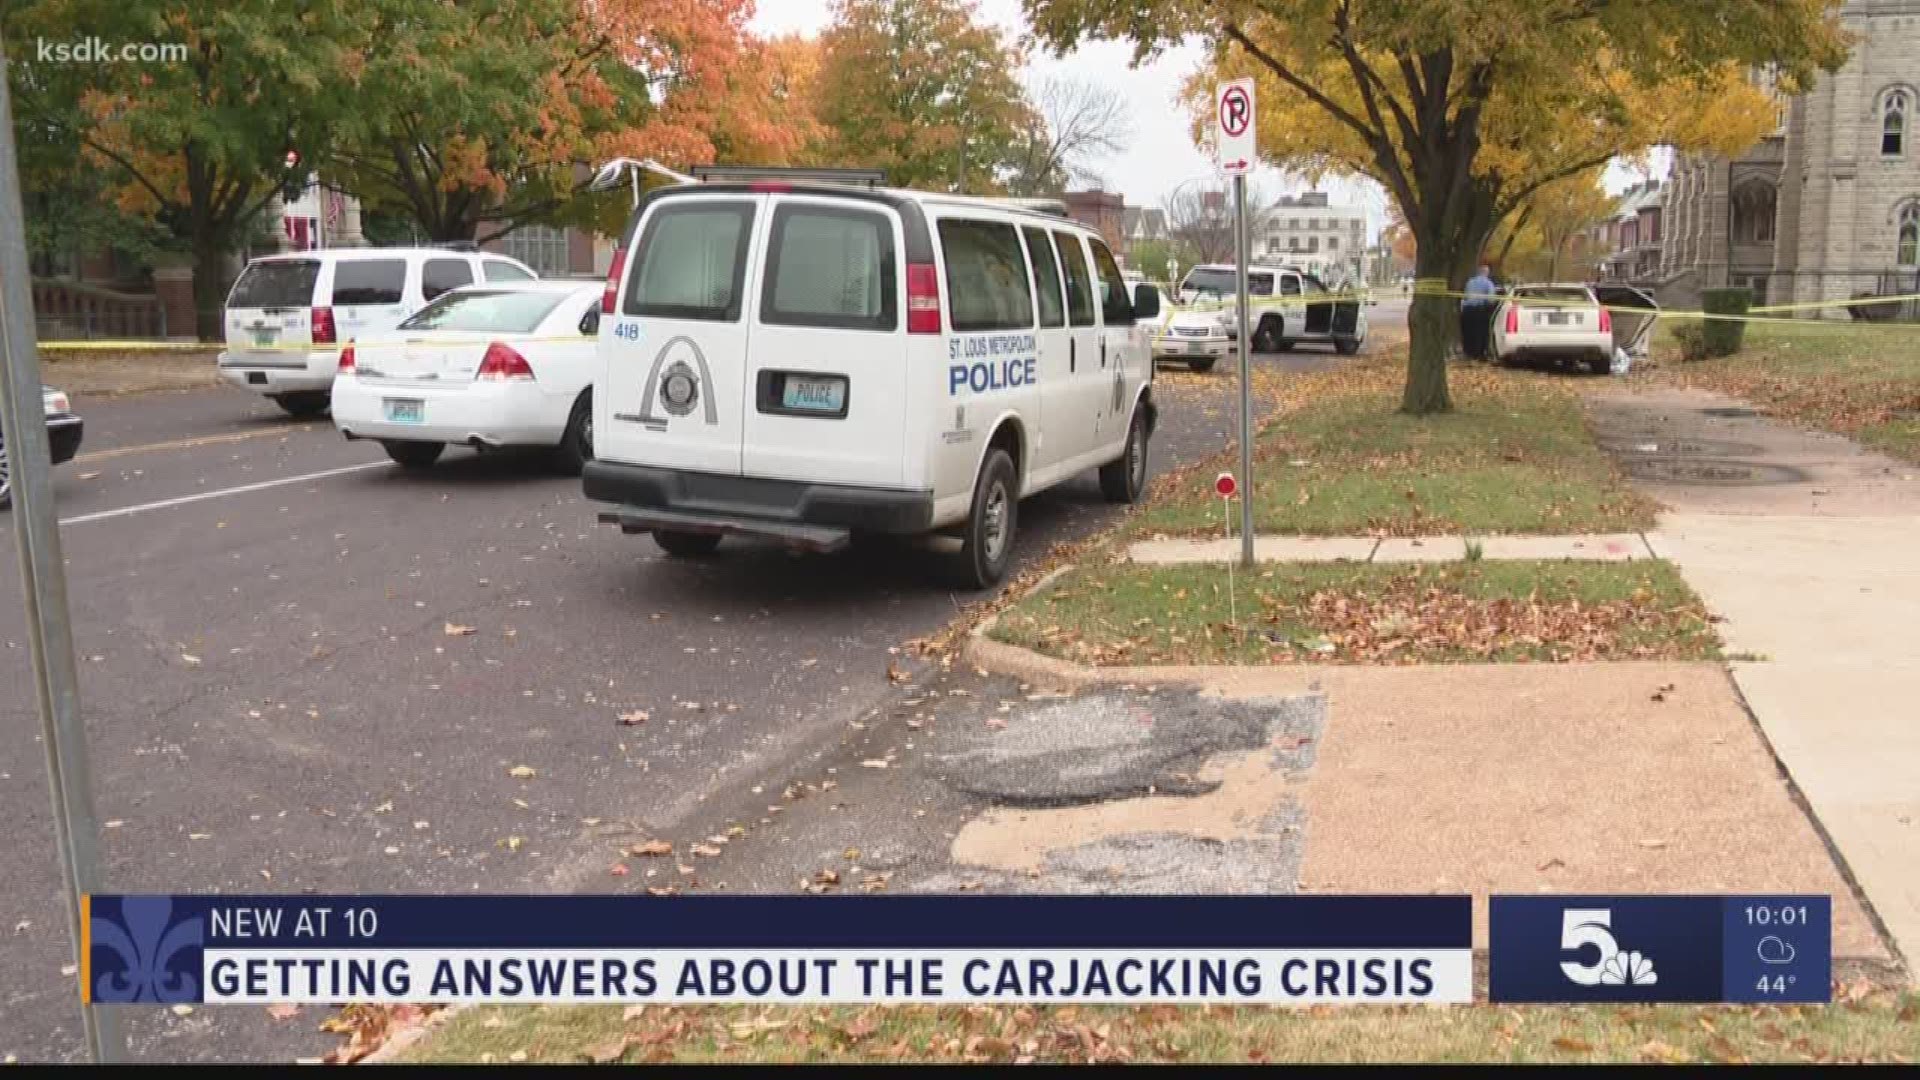 Getting answers about the carjacking crisis